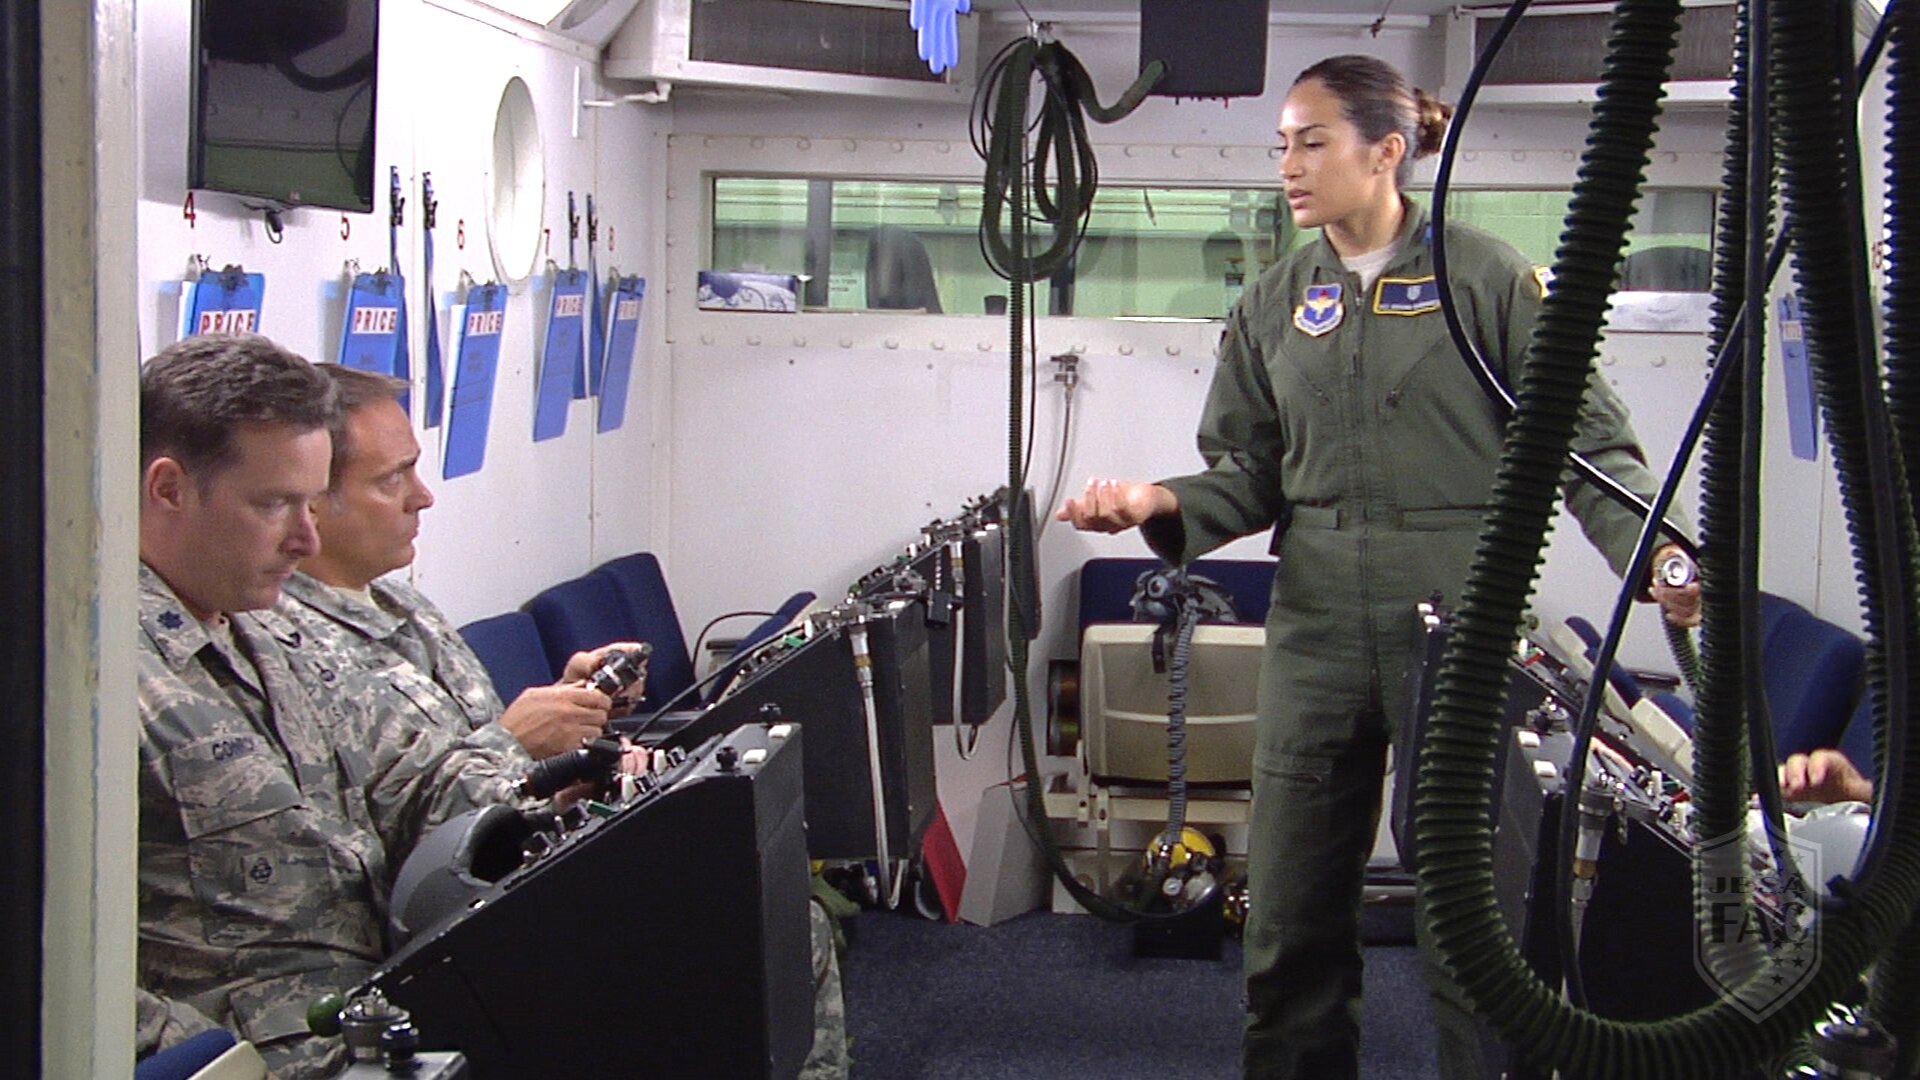 Airman 1st Class Ariana Rodriguez, 359th Aerospace-Medicine Squadron Aerospace and Operational Physiology Flight technician, explains the effects of high altitude and hypoxia during an altitude chamber training class Aug. 6, 2015, at Joint Base San Antonio-Randolph. As a member of the 359th AMS Operational Physiology Flight, Rodriguez helps manage the schedules of the flight’s 18 instructors and the 6,000 students who come for training each year.